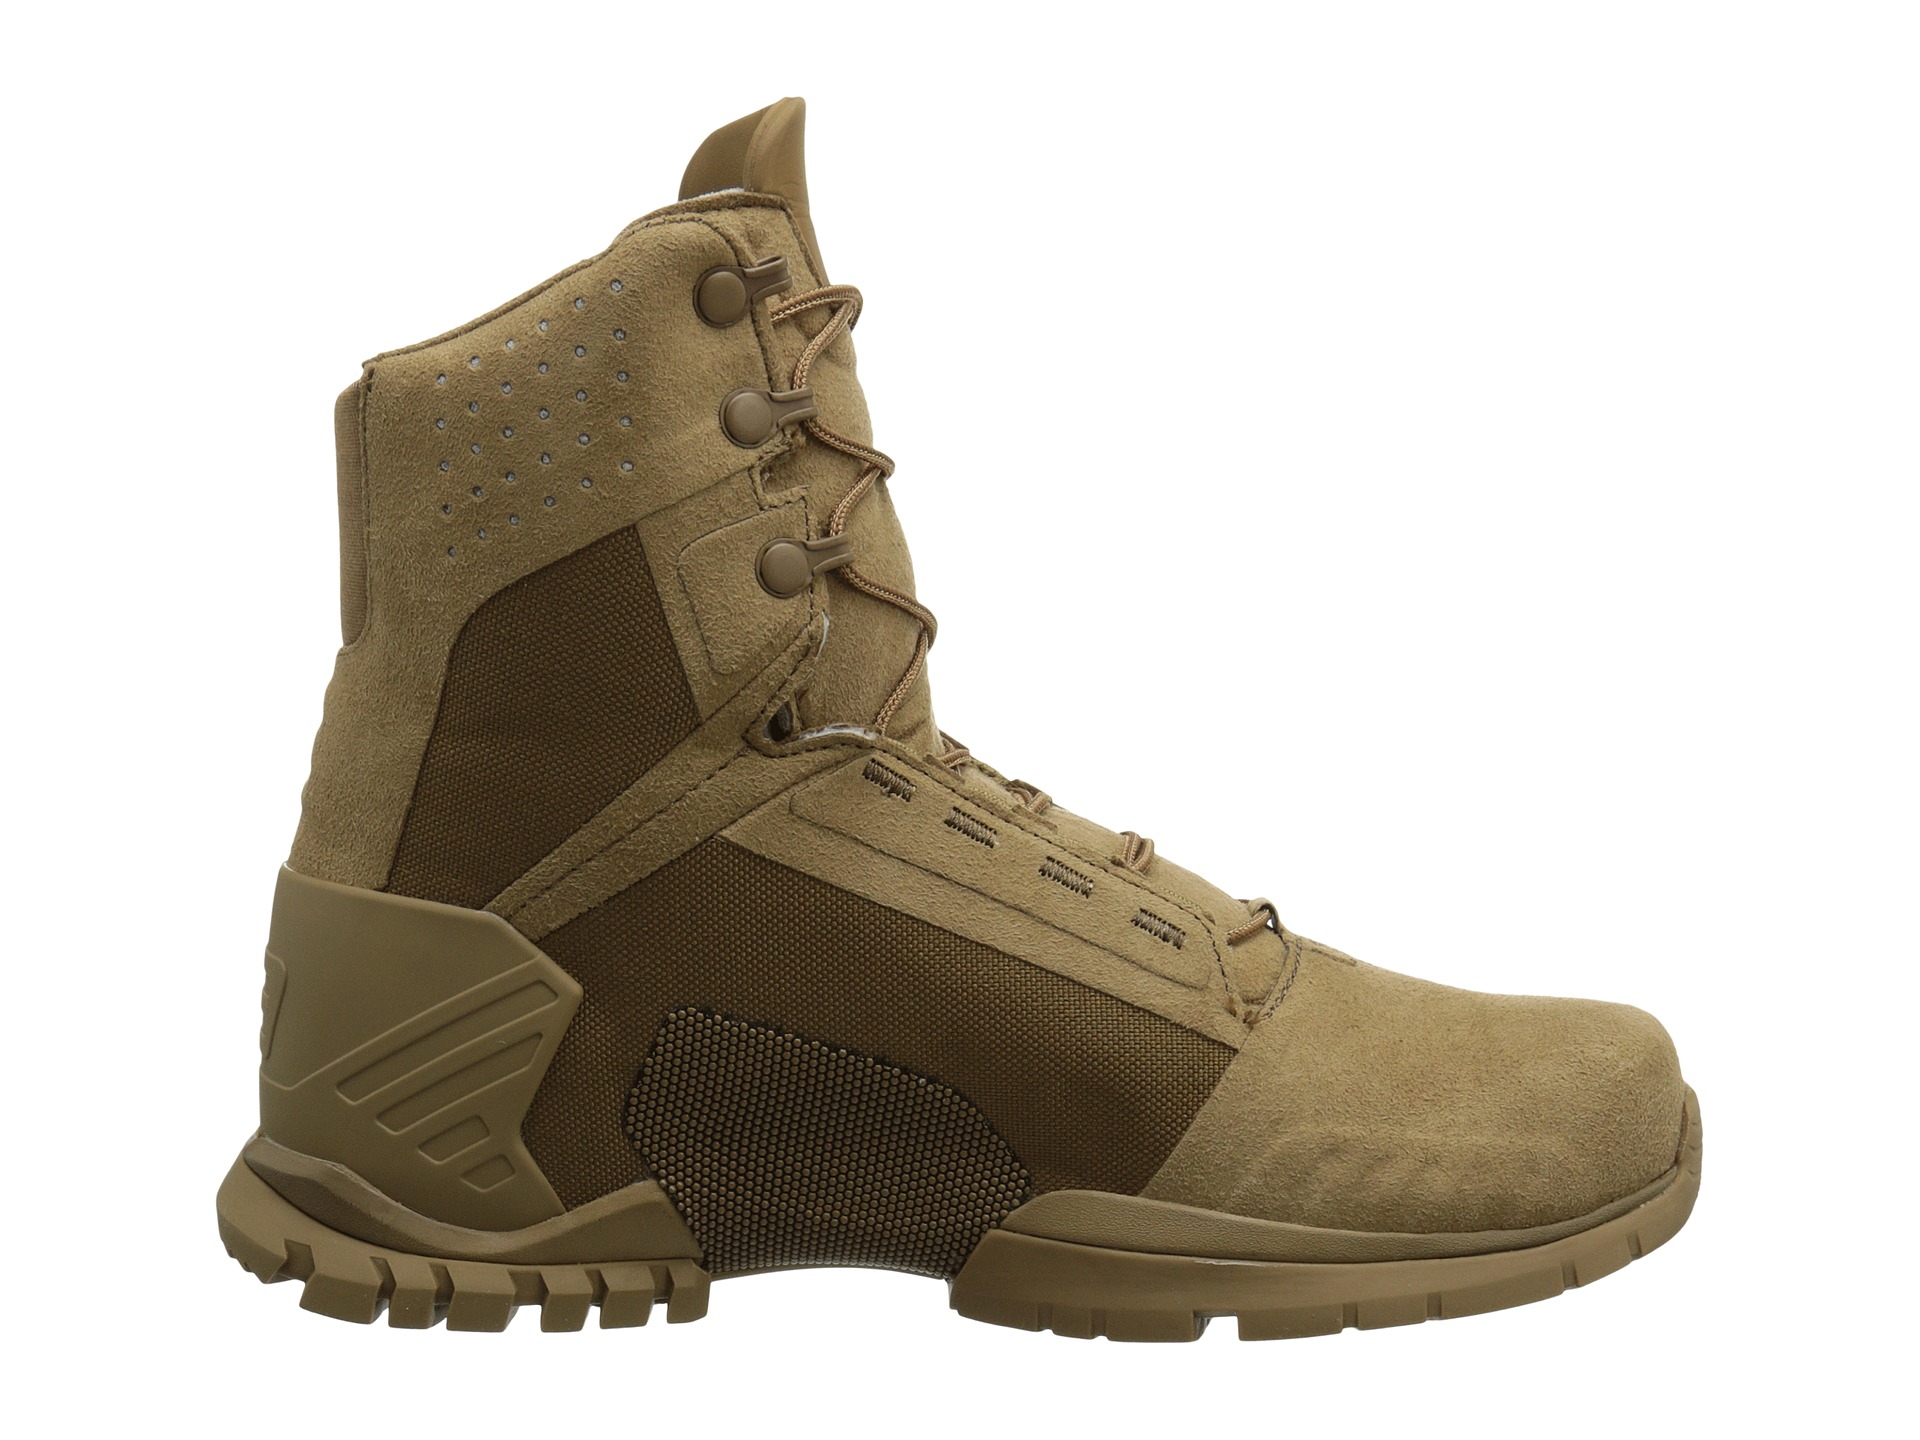 Lyst - Oakley Si-6 Lightweight Military Boot 6 Inch in Green